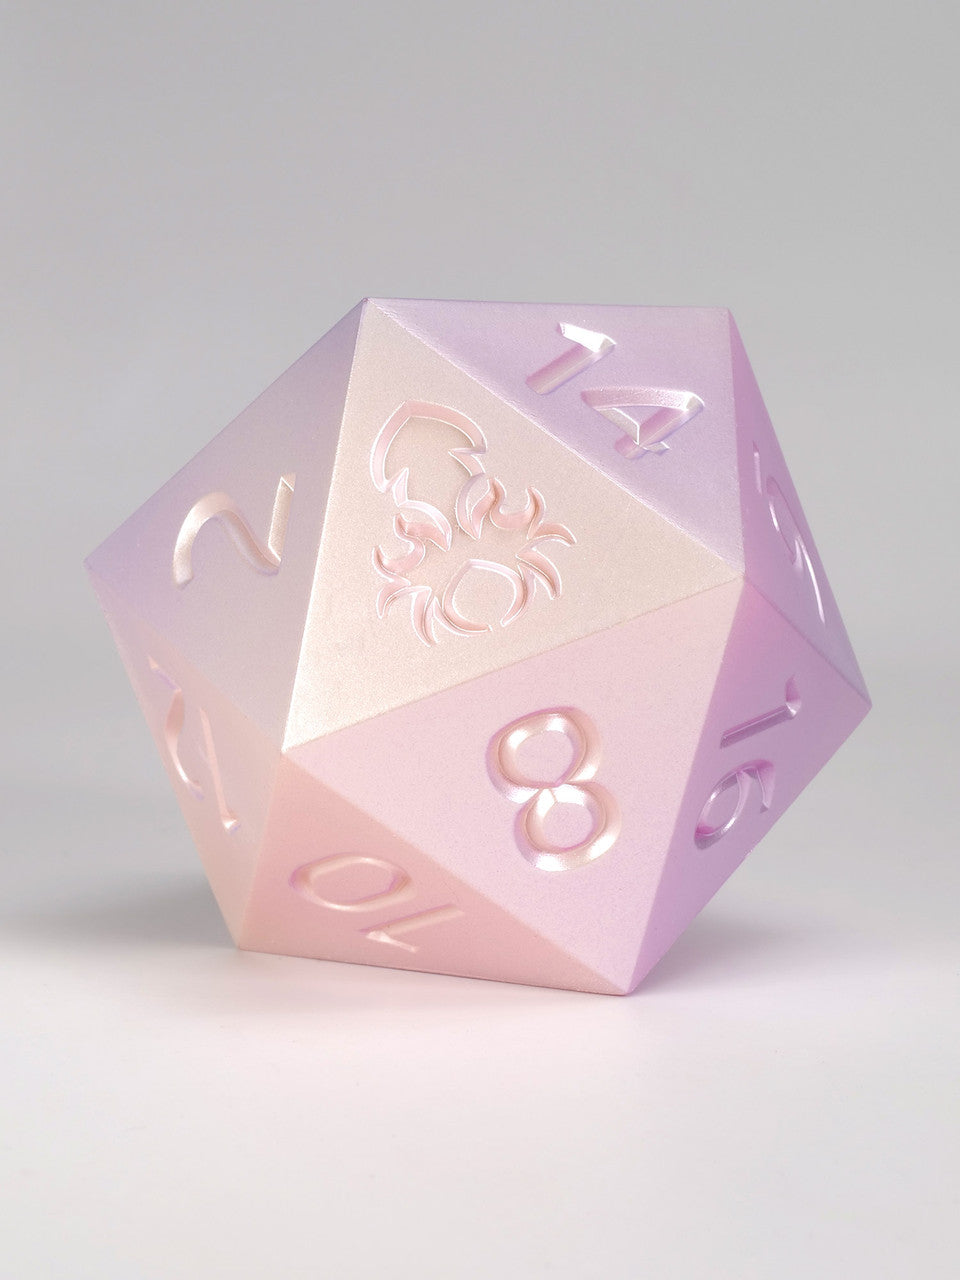 Ombre Princess Pink to Periwinkle 55mm D20 Dice